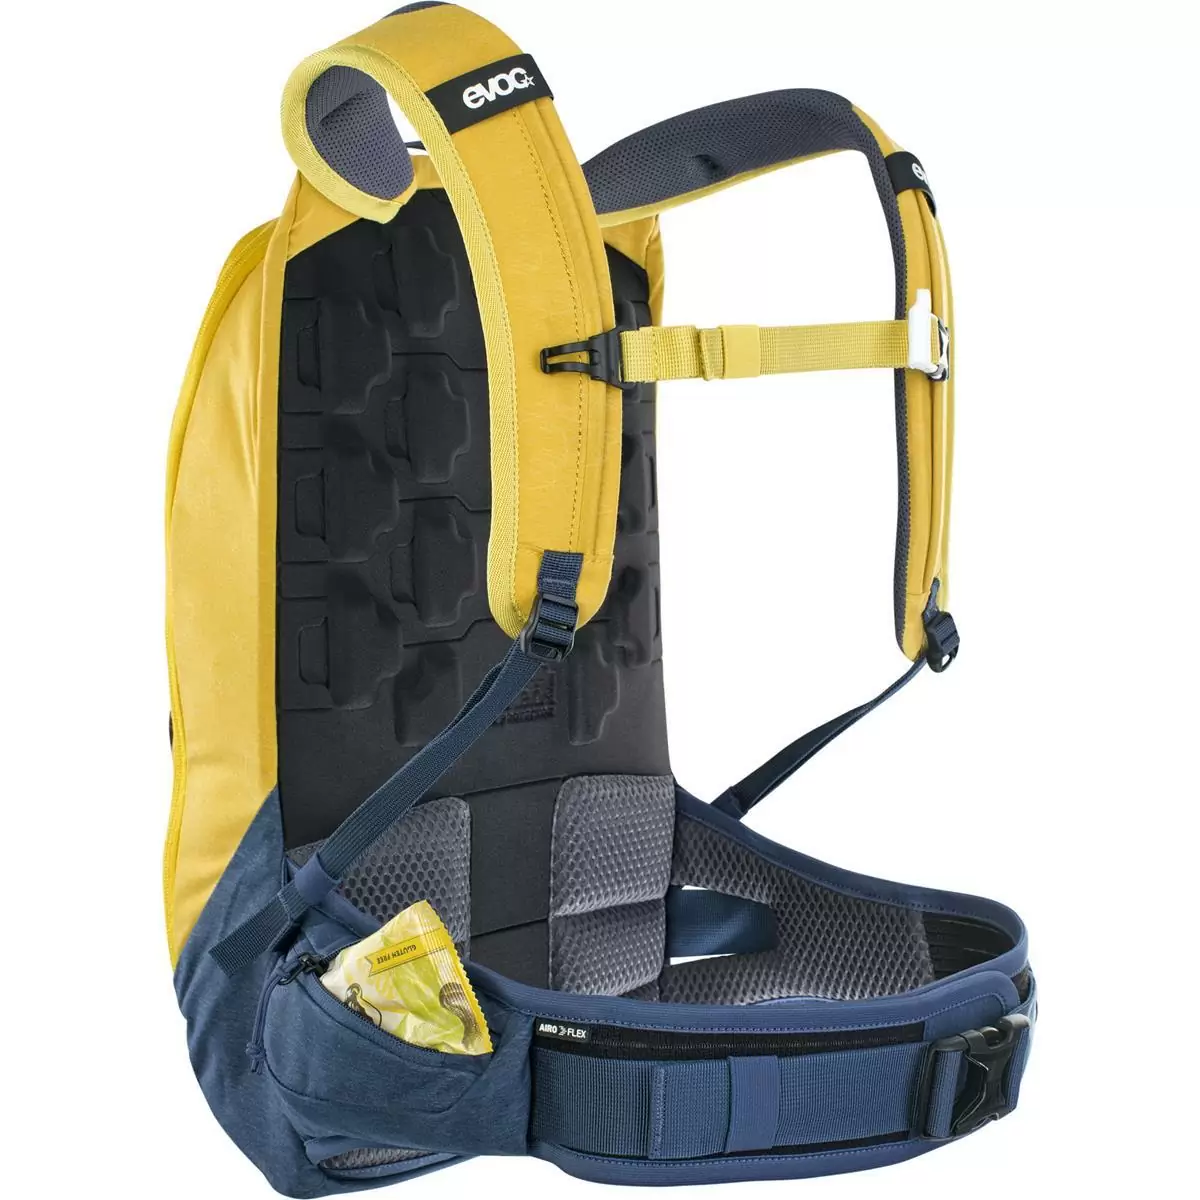 Trail Pro backpack 10 liters Curry – Denim with back protector size S/M #5